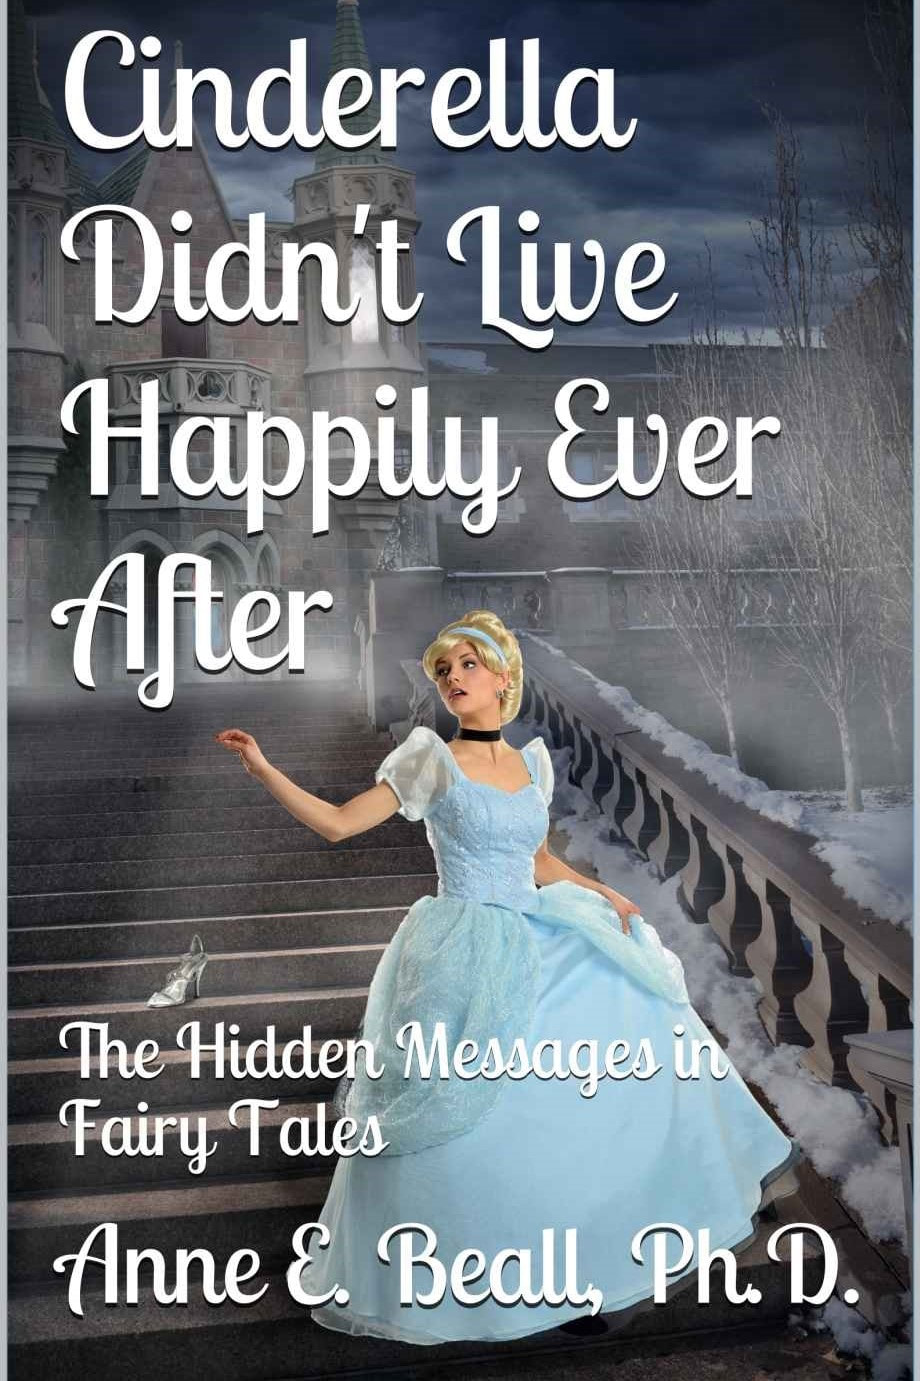 CINDERELLA DID NOT LIVE HAPPILY EVER AFTER by Anne Beall